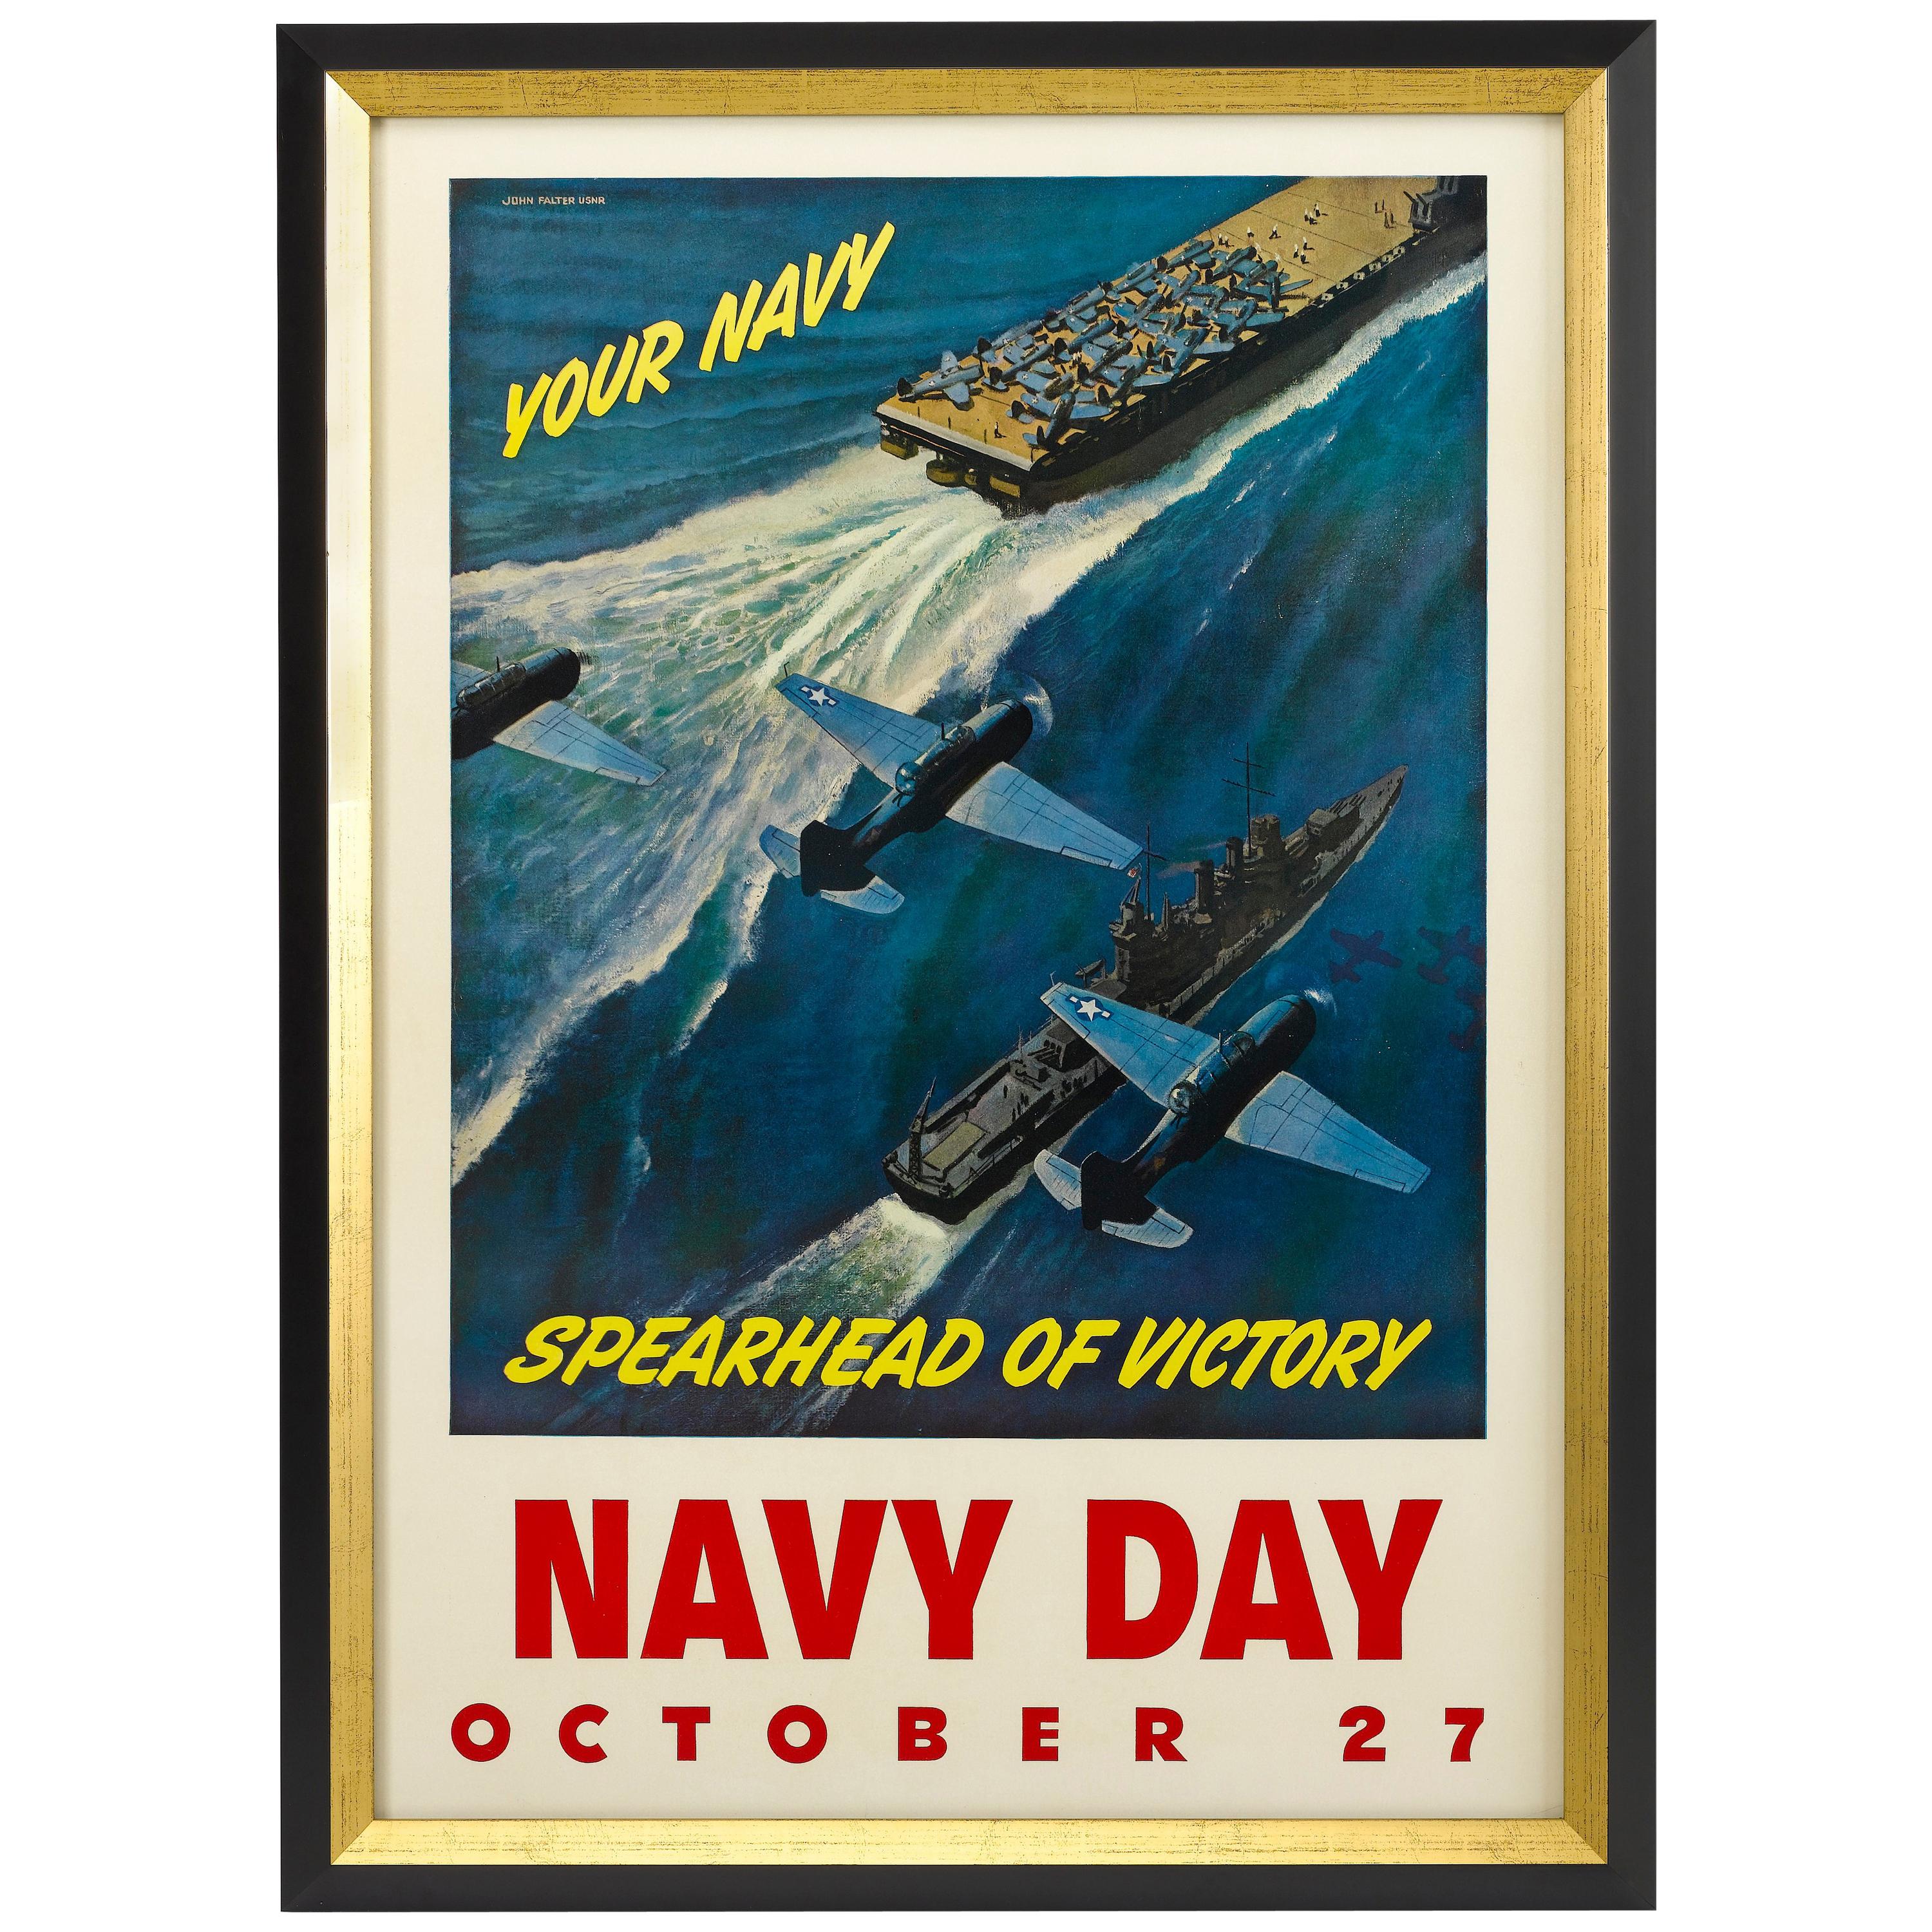 "Navy Day / October 27" Vintage WWII Poster by John Falter, circa 1940s